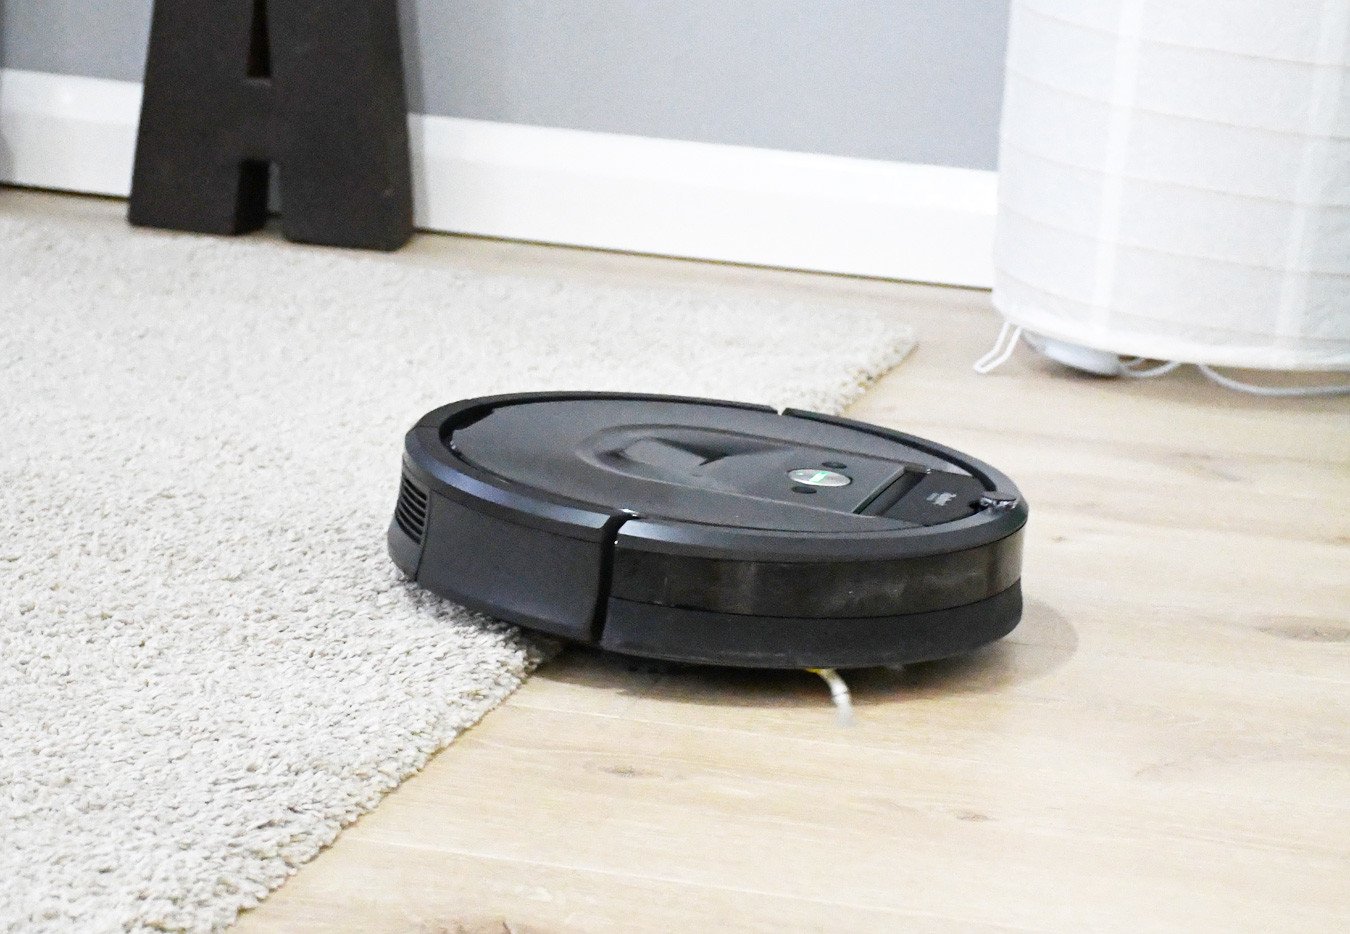 Roomba review: the iRobot 980 navigating from wood floor to rug